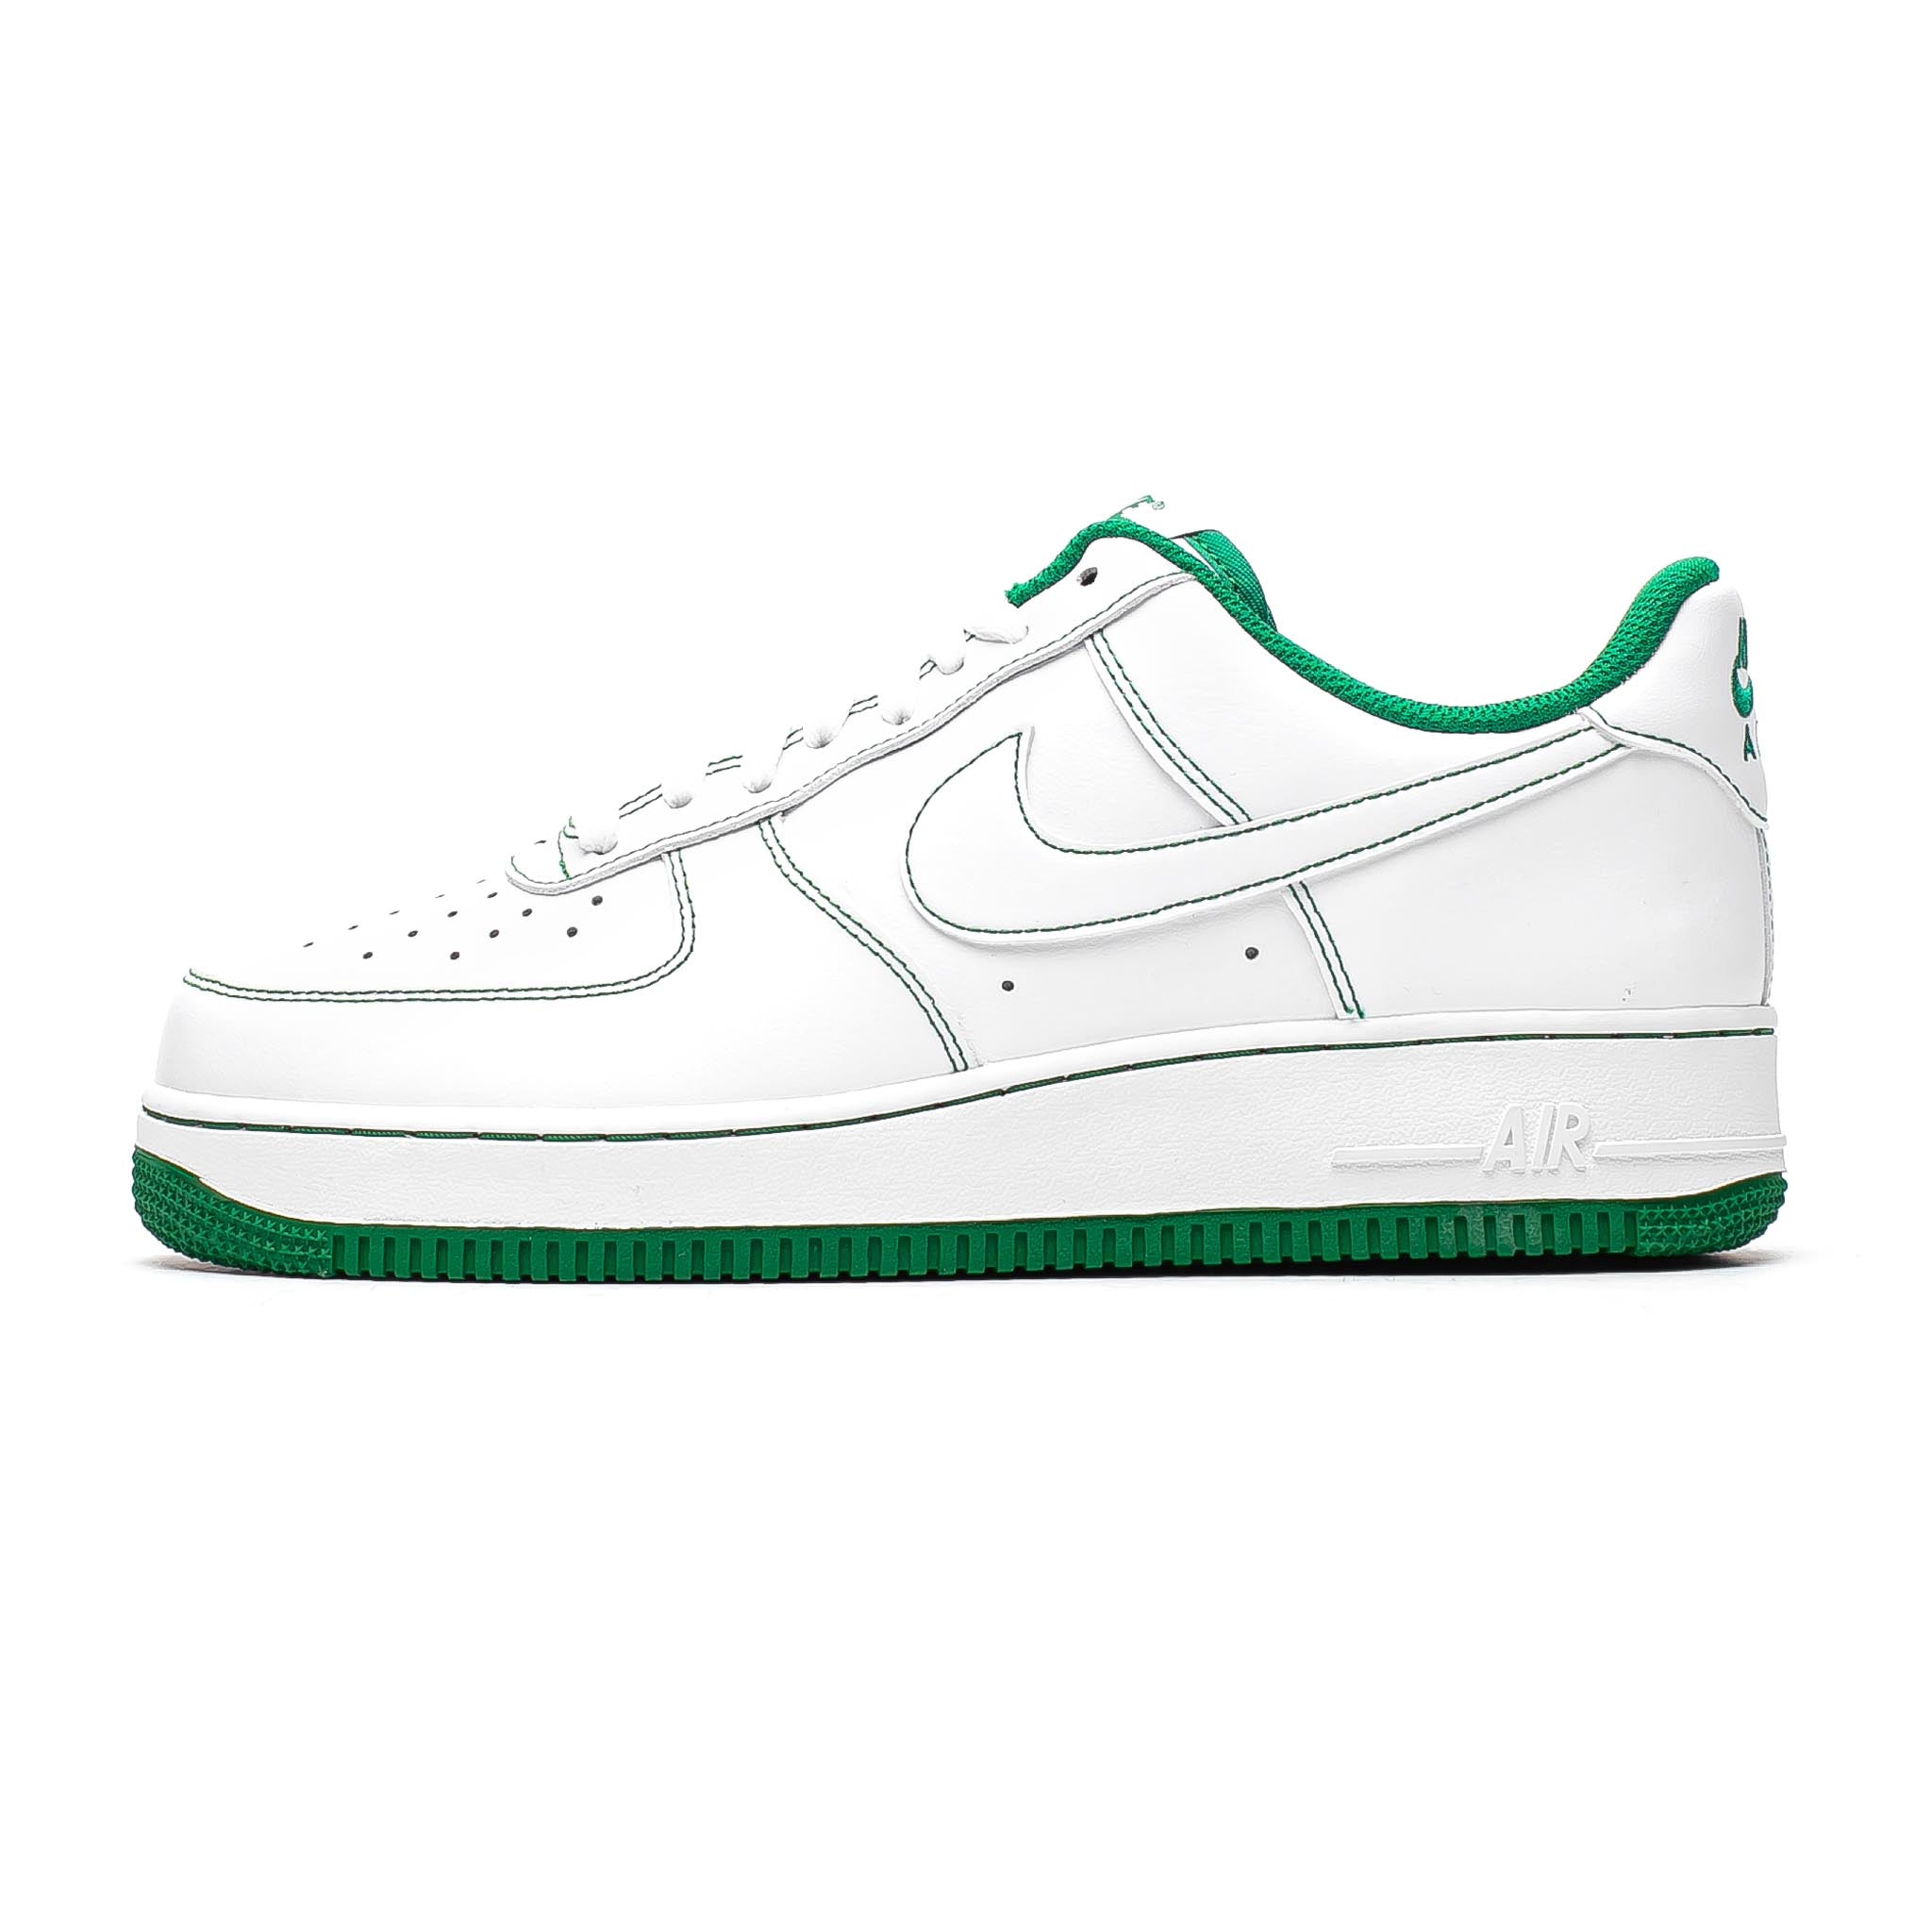 Nike Air Force 1 '07 'Contrast Stitch' White/Pine Green